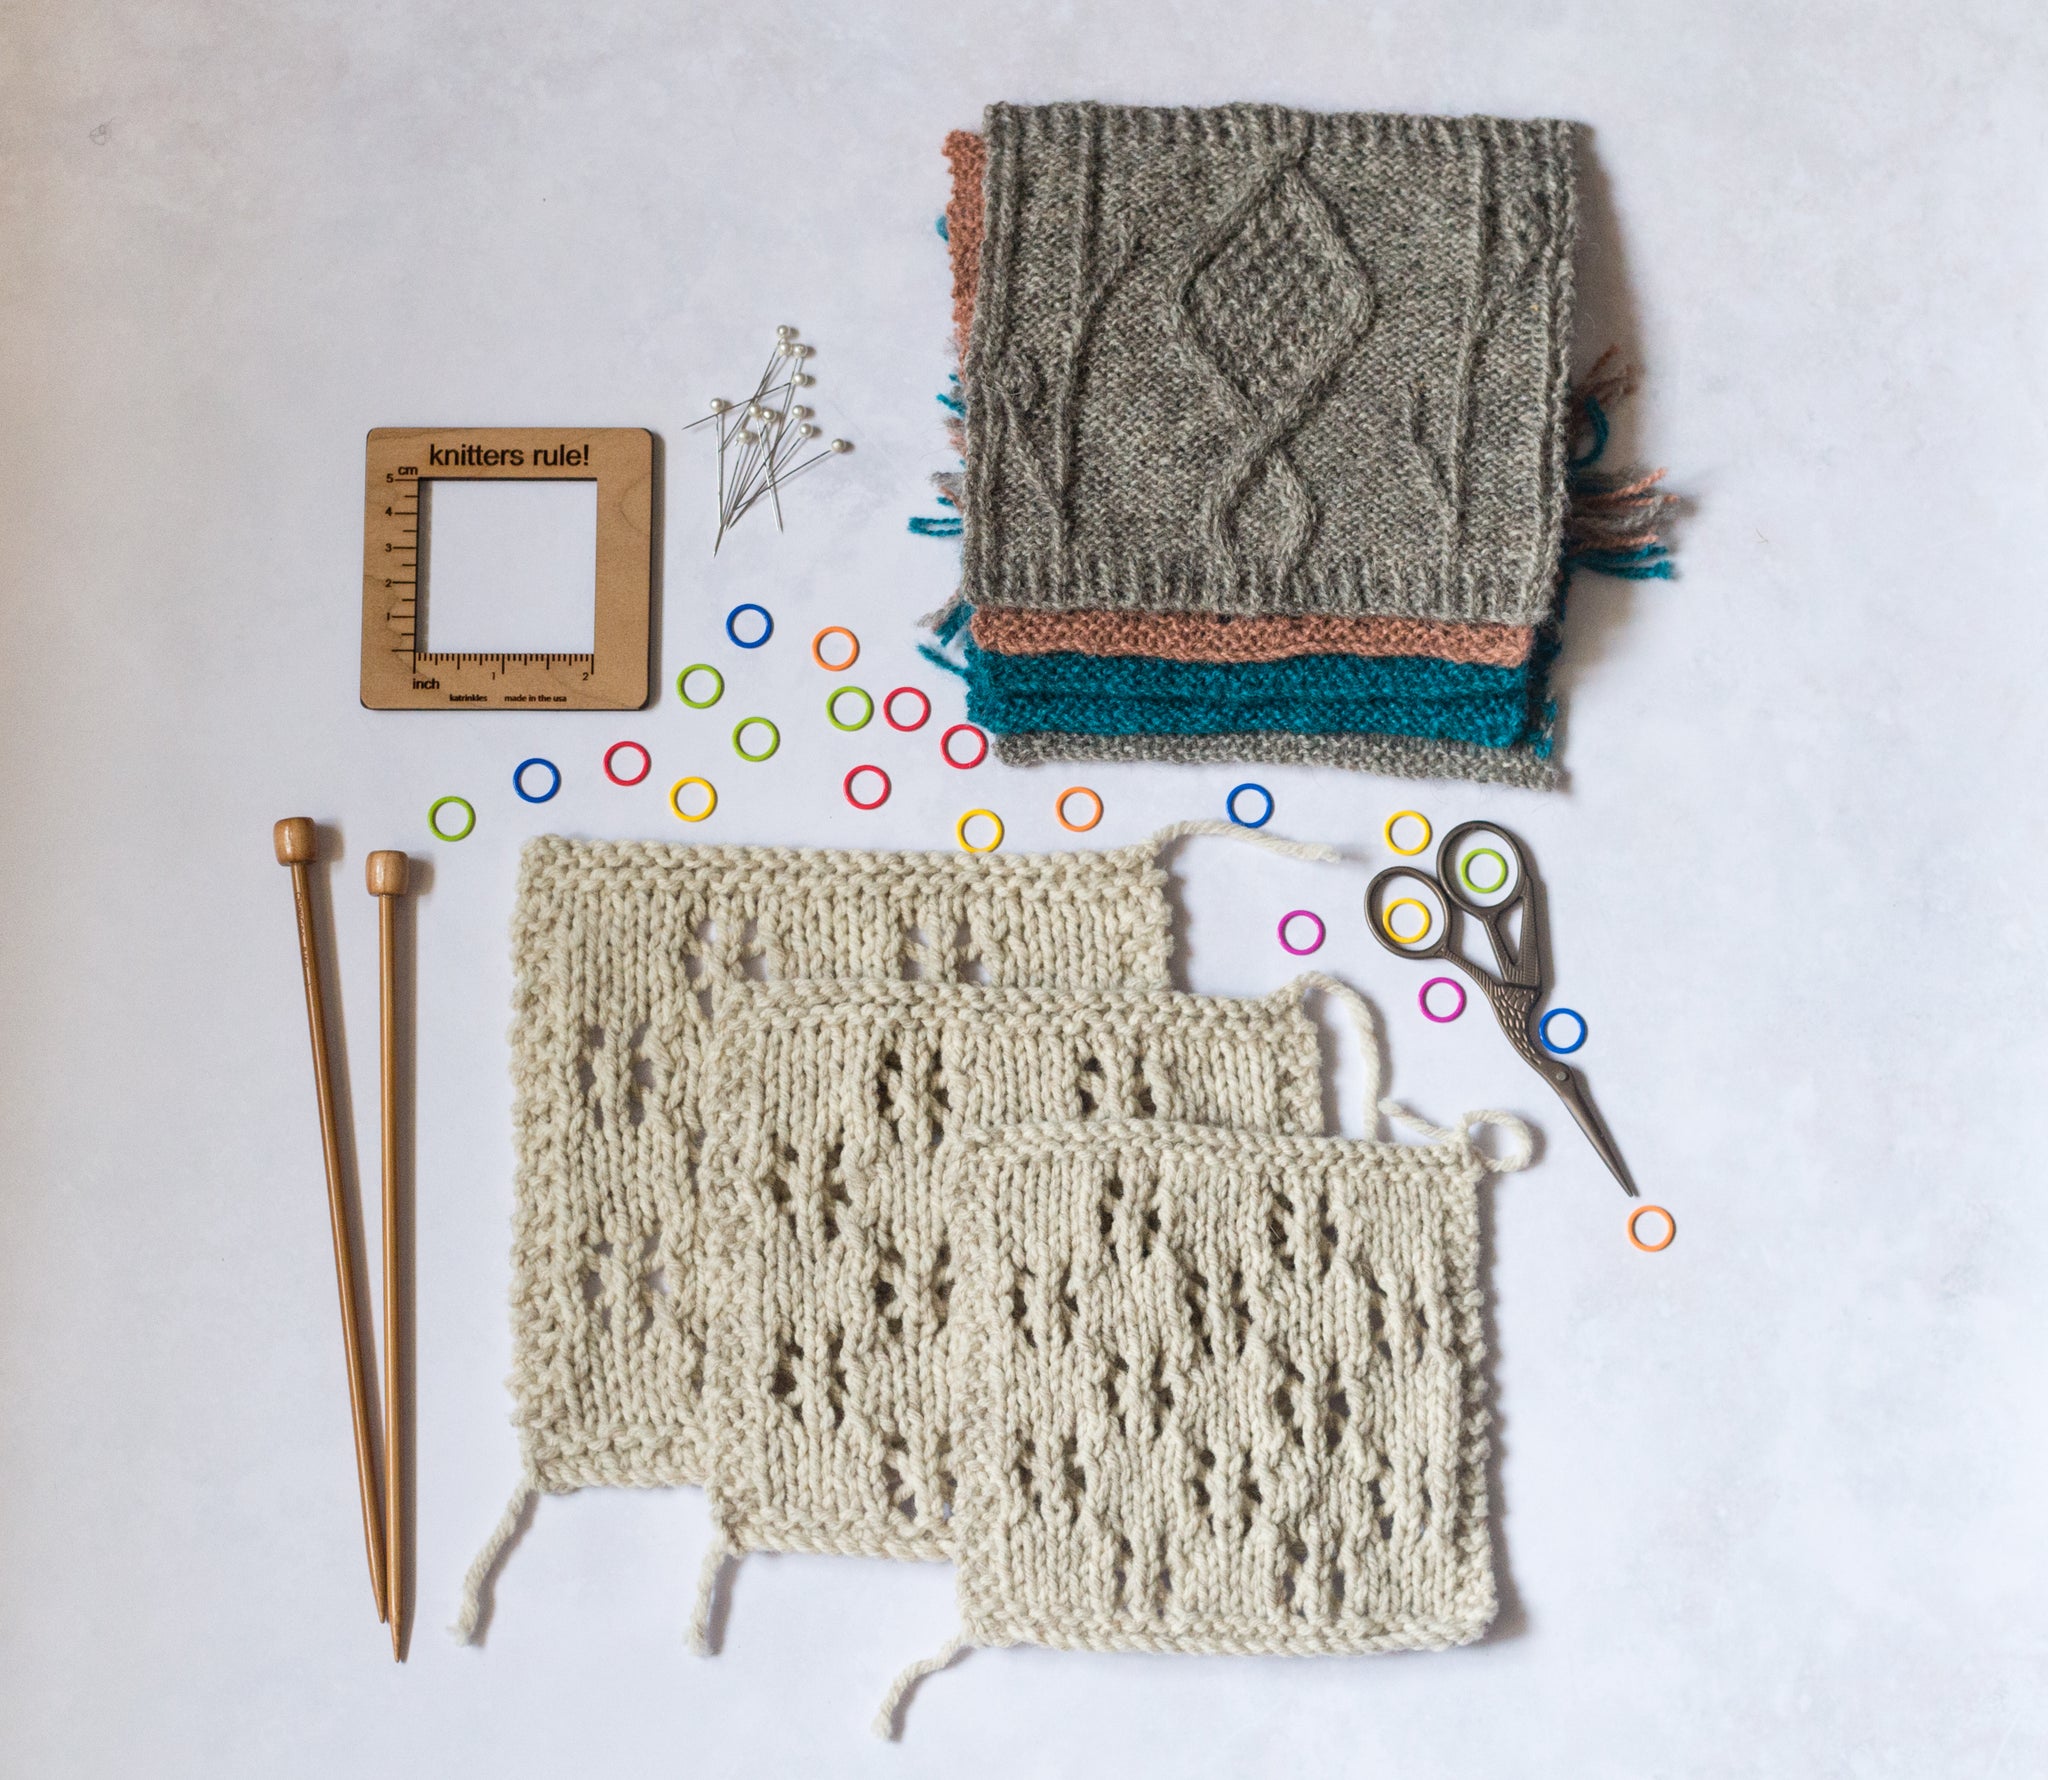 Three natural coloured lace swatches like overlapping each other, with a pile of swatches above in the top right of the image. Also arranged next to the swatches in a pair straight wooden knitting needles, a square wooden measuring tool, t-pins, brightly coloured stitch markers and a small pair of scissors. 